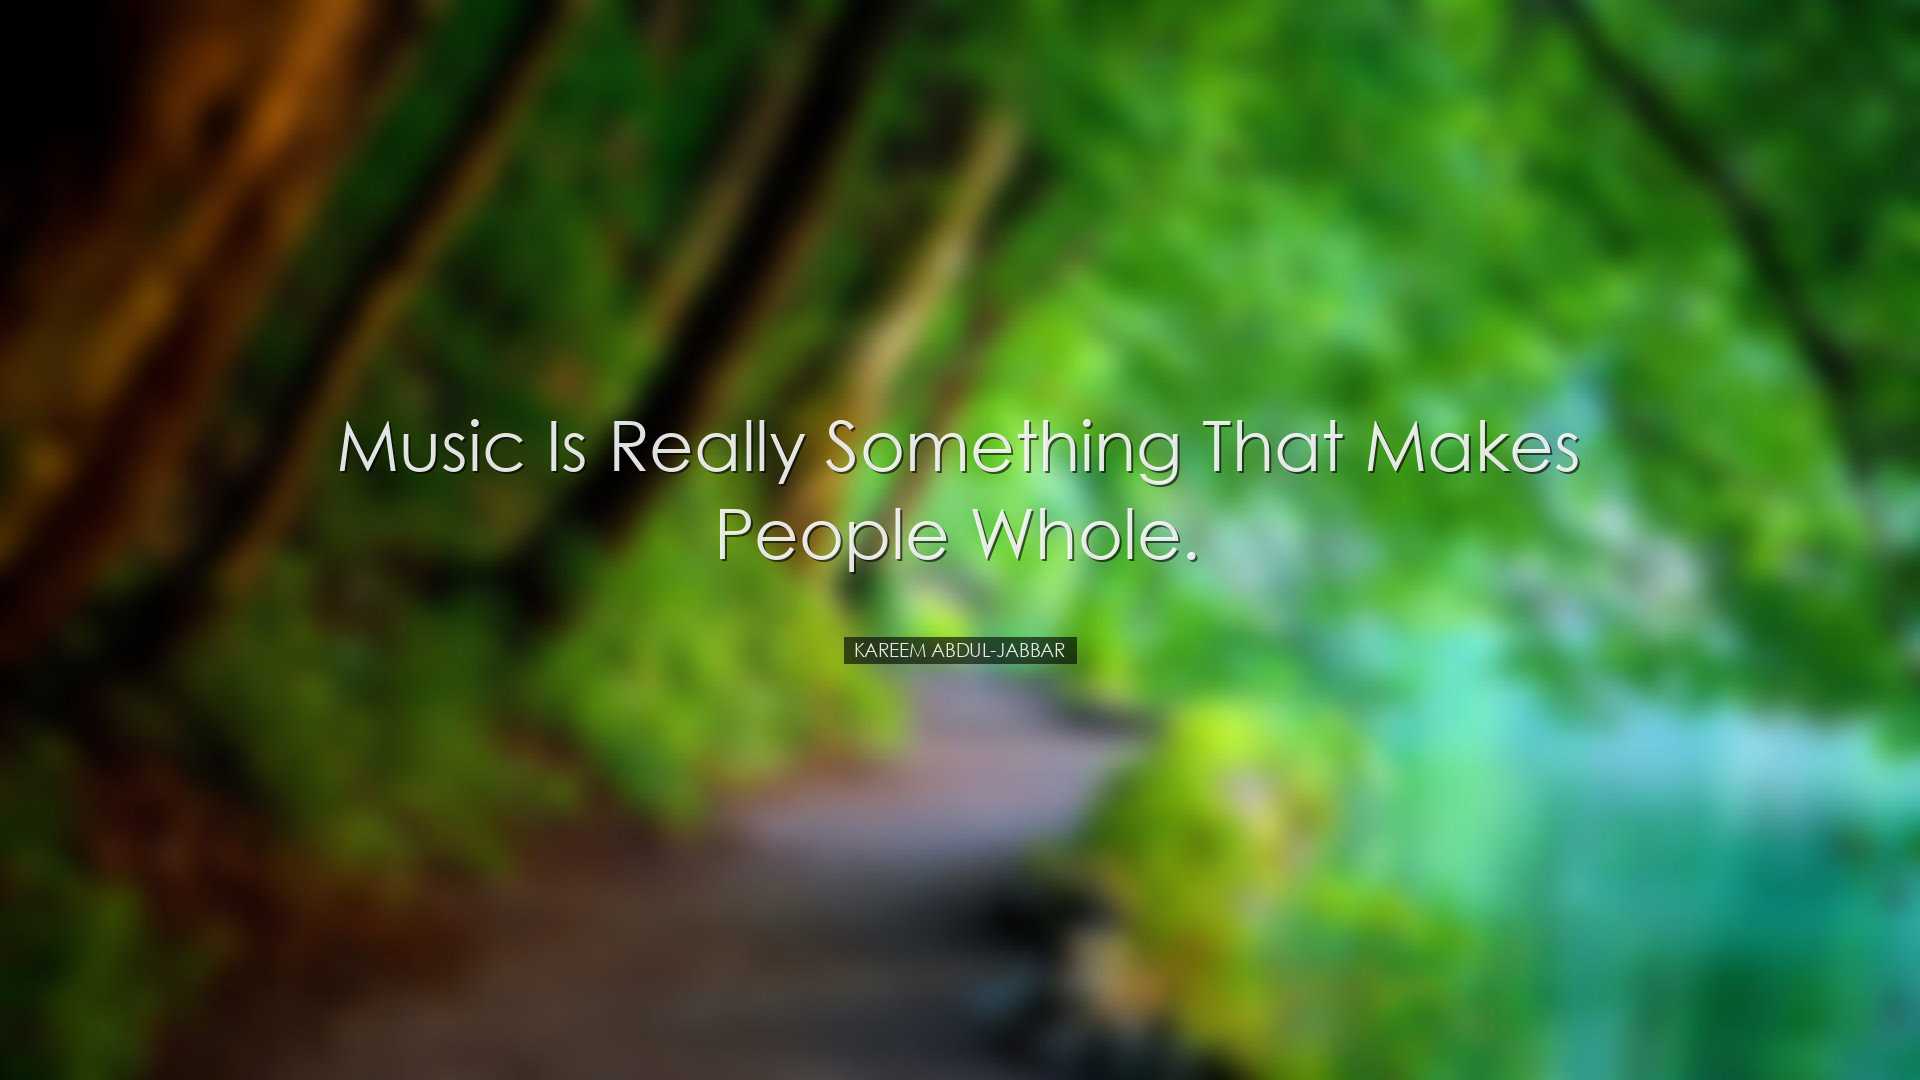 Music is really something that makes people whole. - Kareem Abdul-